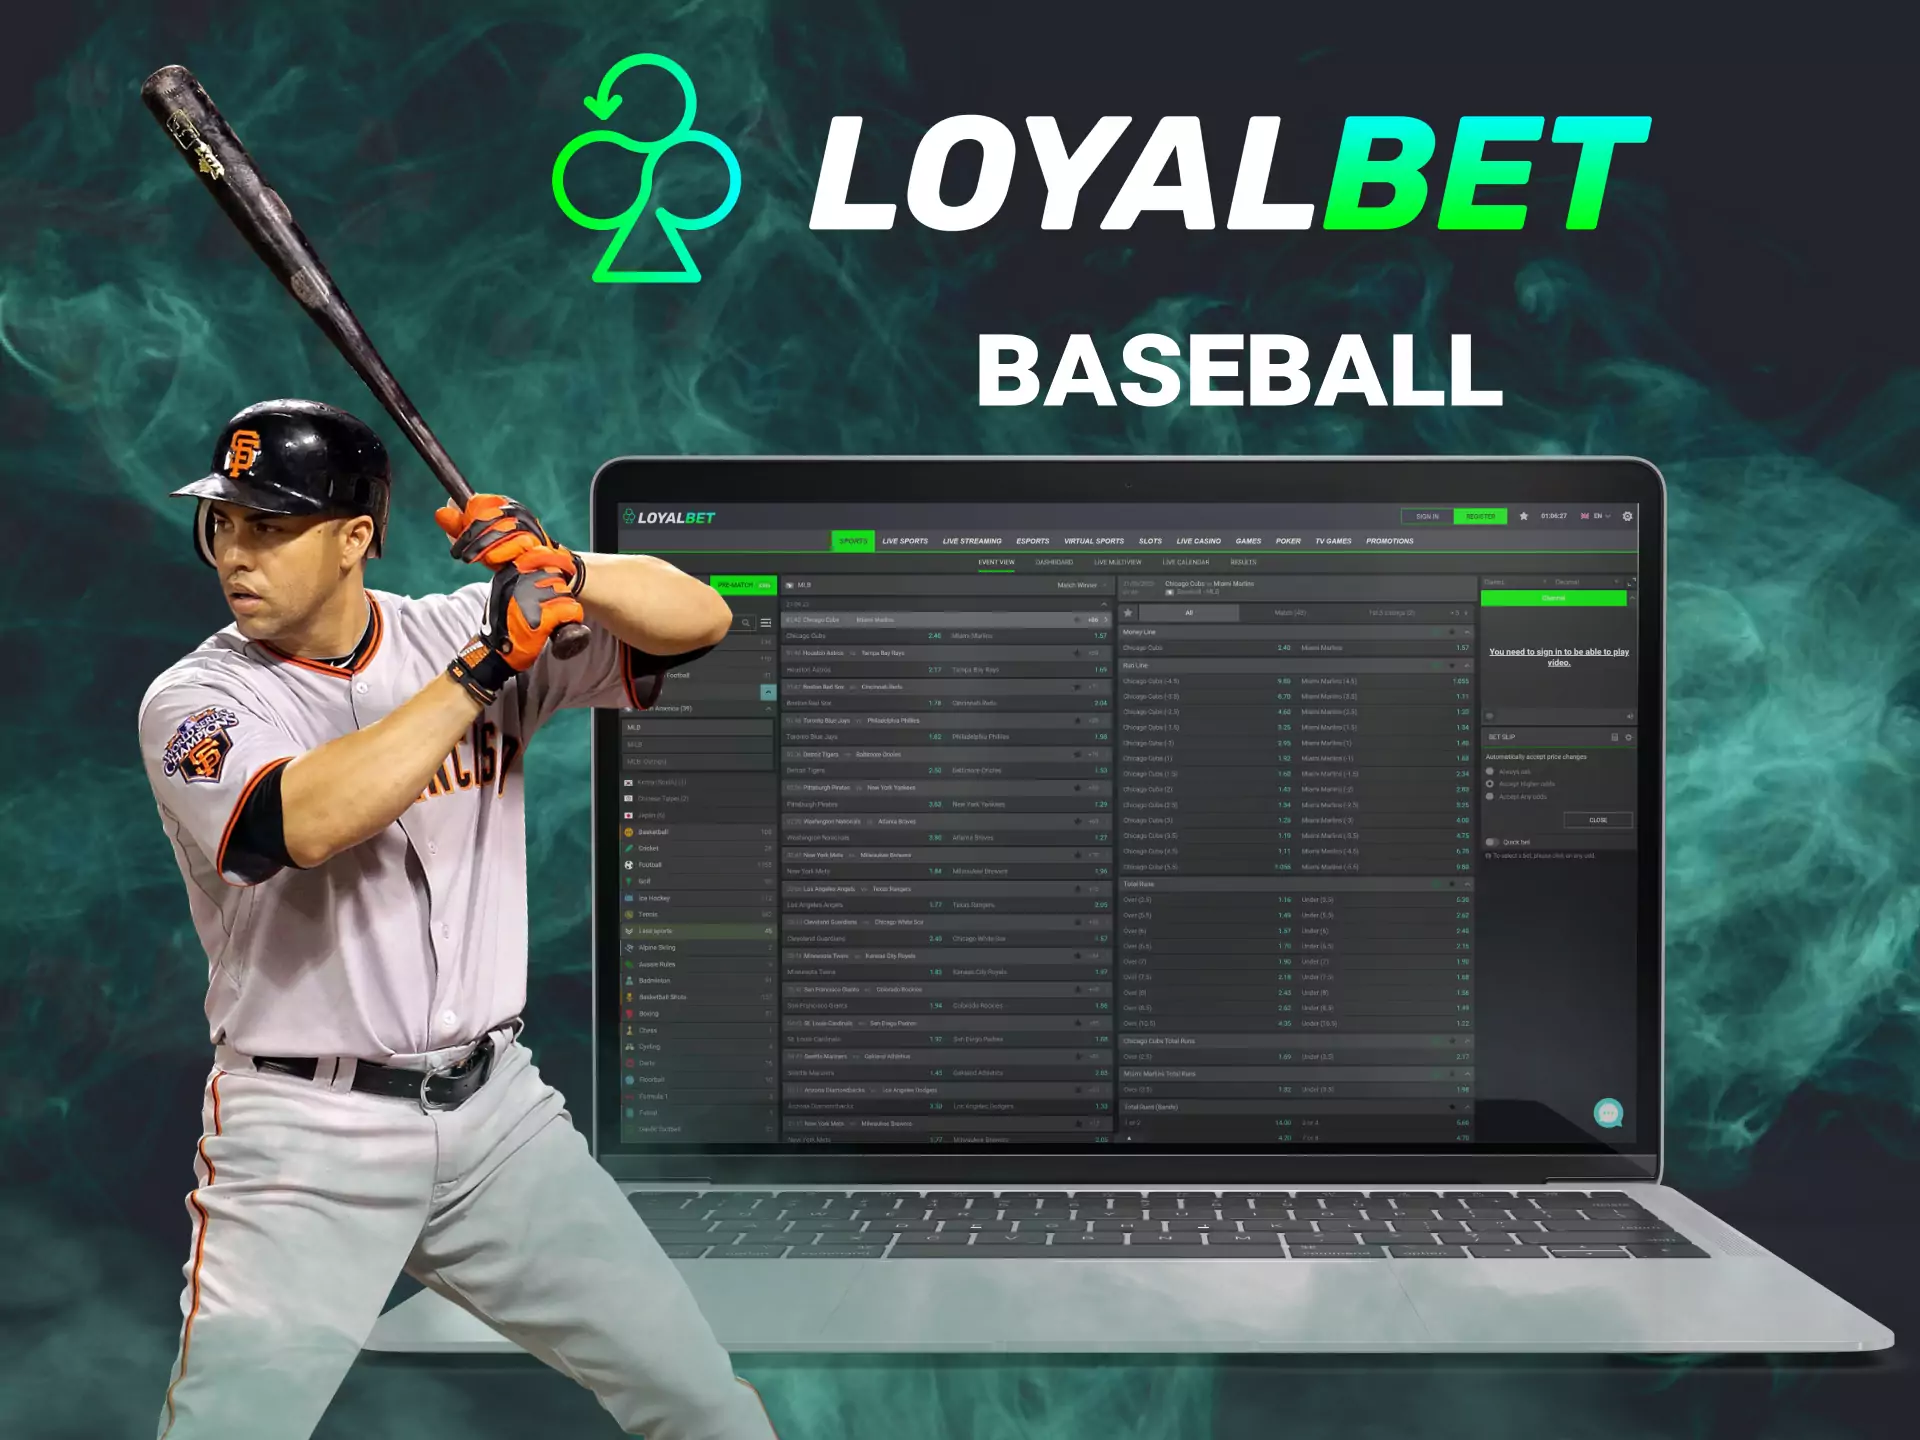 Betting on baseball is possible on the Loyalbet website.